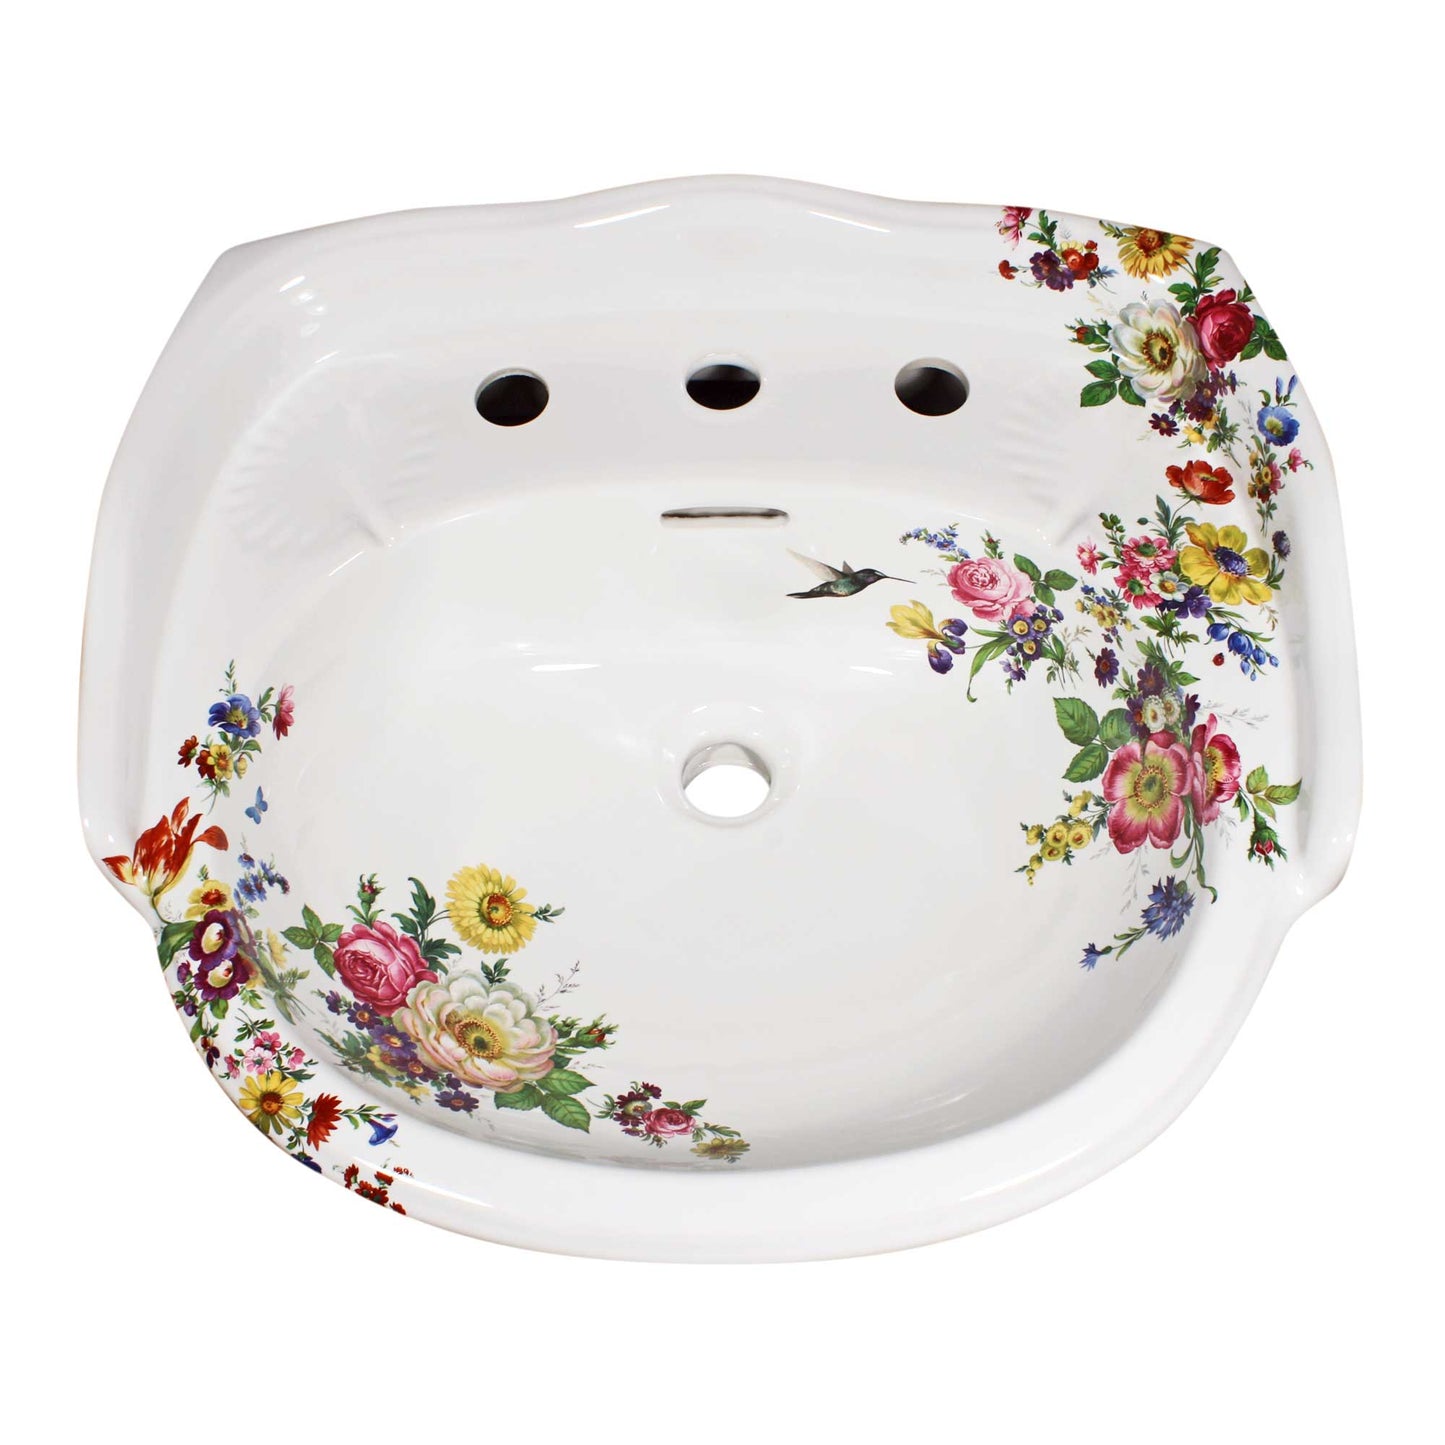 Pedestal lavatory bowl painted with colorful flowers